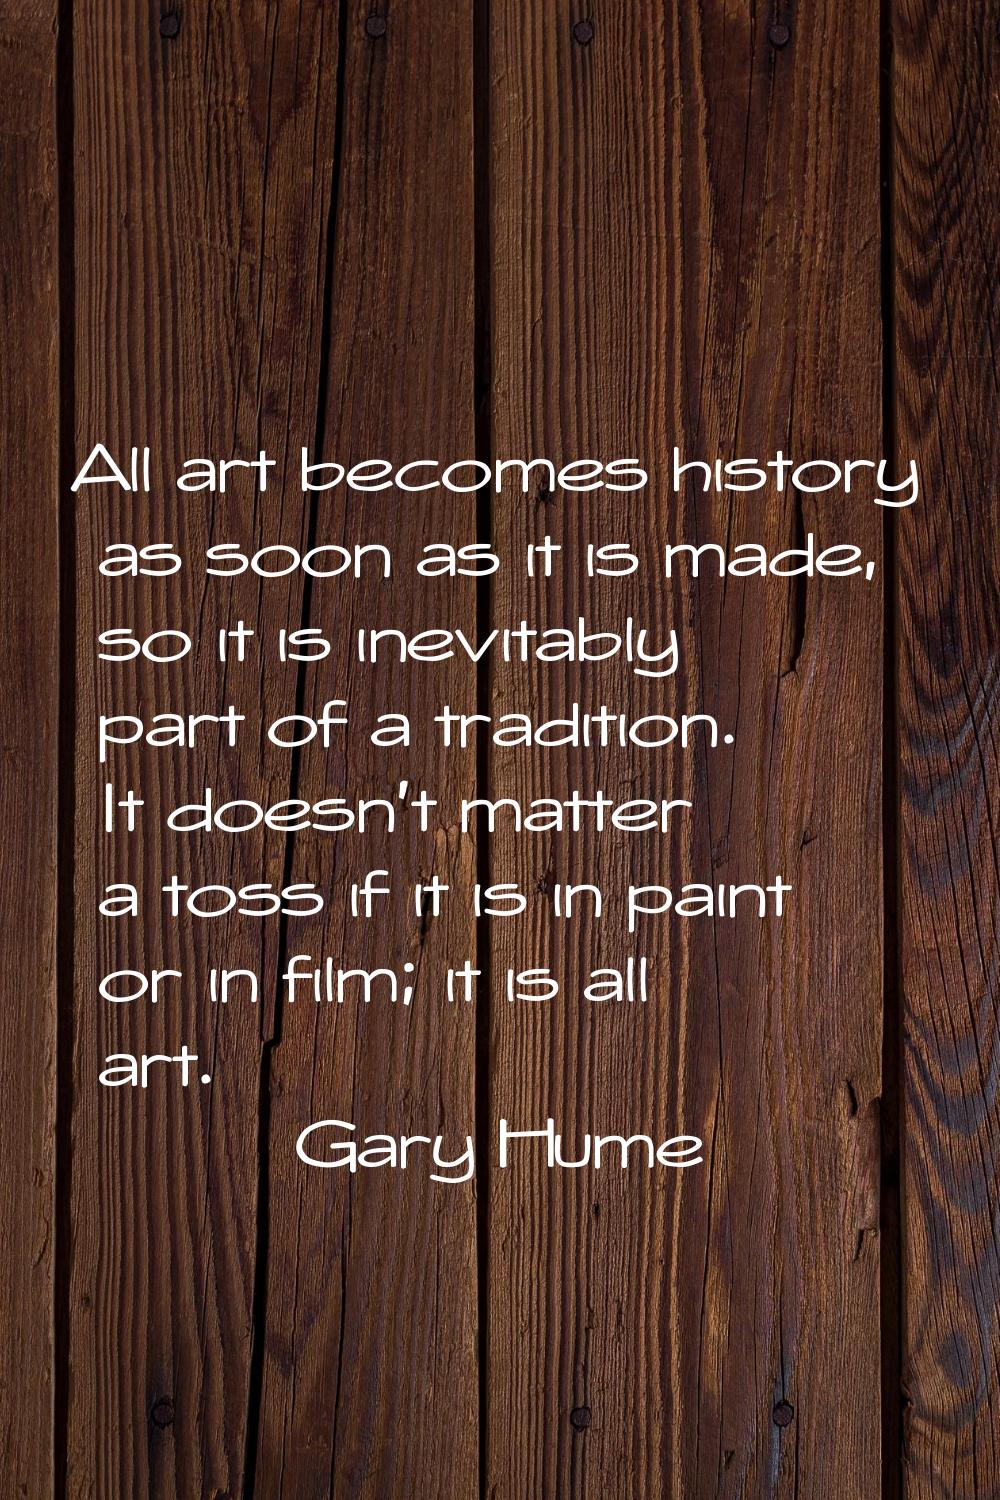 All art becomes history as soon as it is made, so it is inevitably part of a tradition. It doesn't 